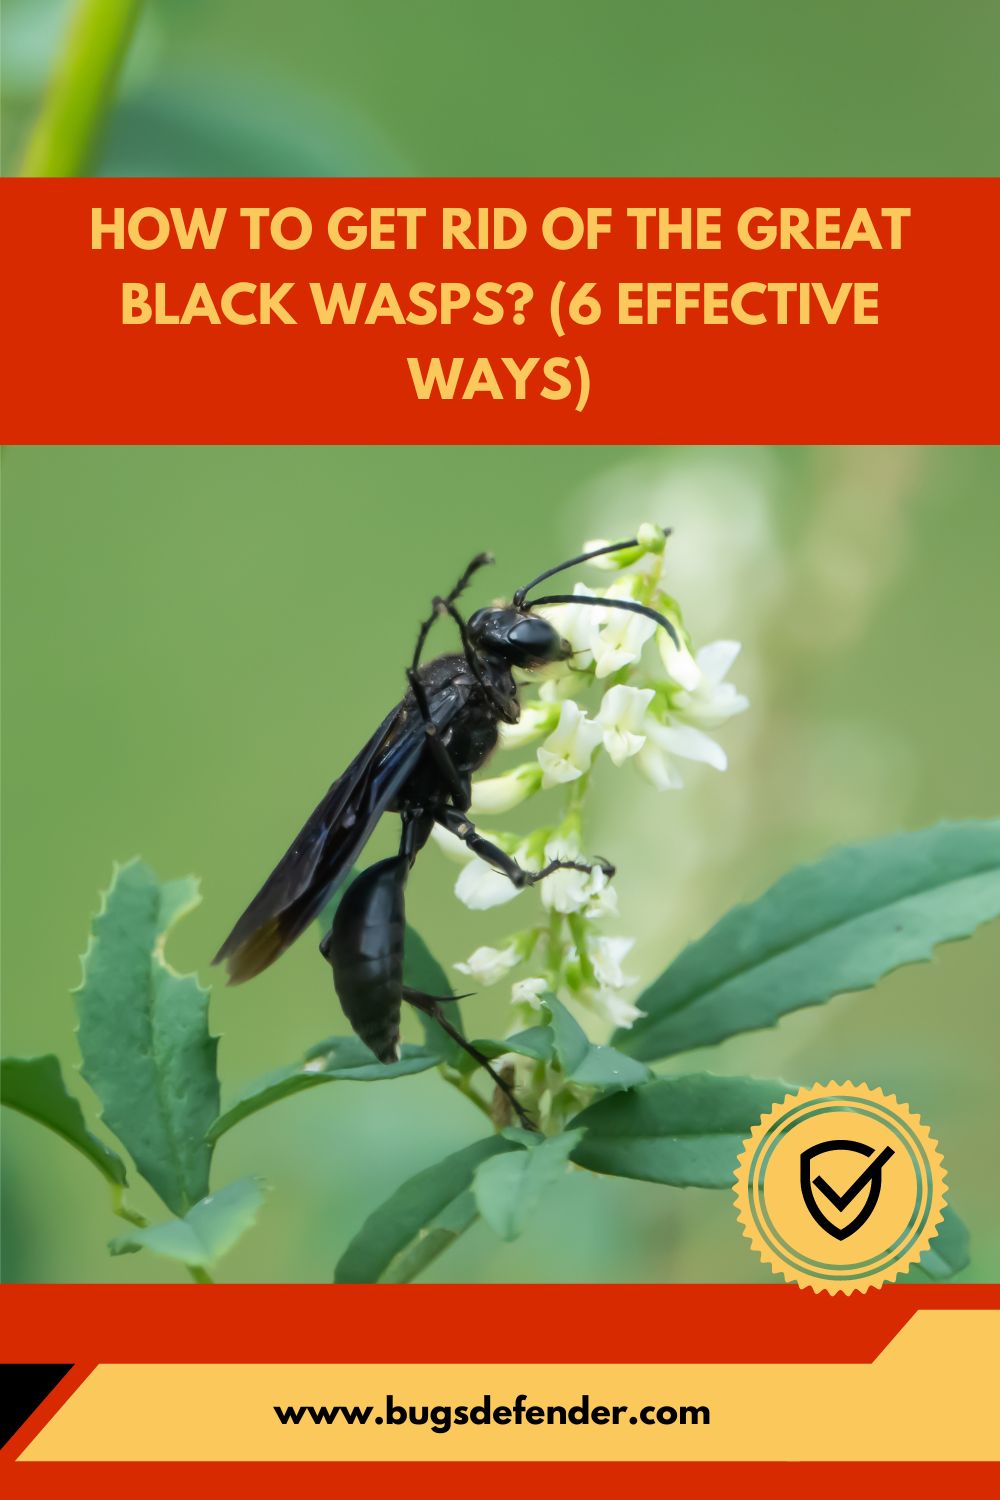 How To Get Rid of The Great Black Wasps (6 Effective Ways) pin2